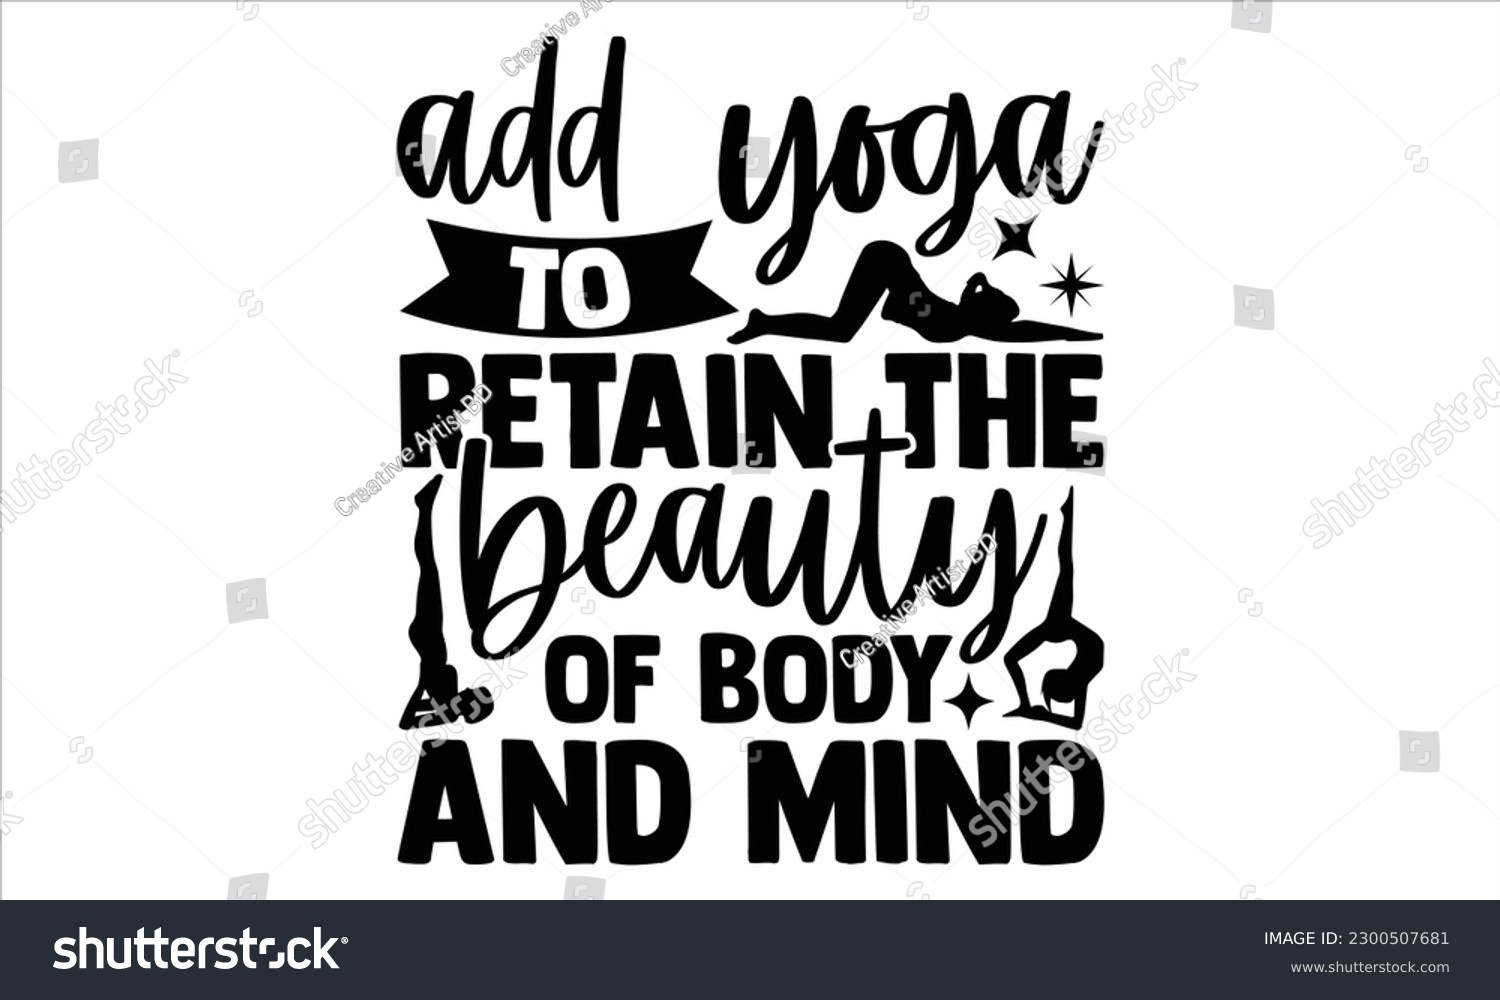 SVG of Add yoga to retain the beauty of body and mind  - Yoga Day SVG Design, Hand lettering inspirational quotes isolated on white background, used for prints on bags, poster, banner, flyer and mug, pillows svg